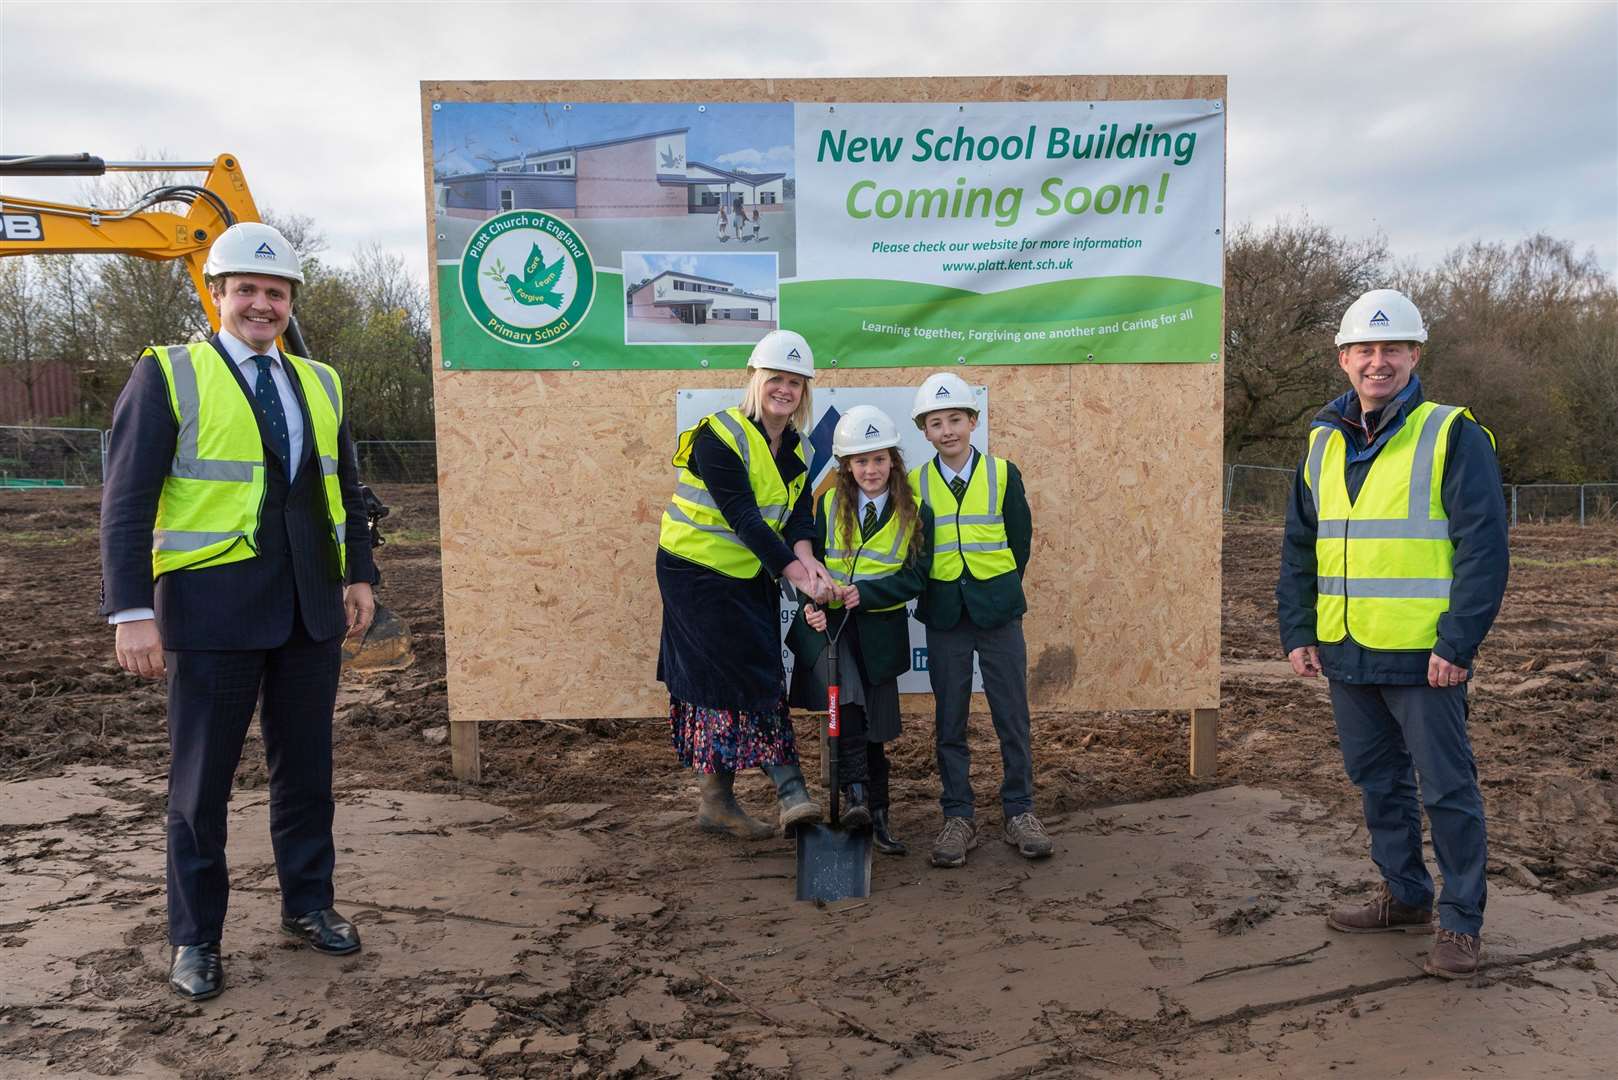 Ground-breaking ceremony at new Platt Primary School site with Tonbridge and Malling MP Tom Tugendhat, head teacher Jenna Crittenden, chairman of governors Paul Vallance, and the schools’ head boy Philip and head girl Lucy